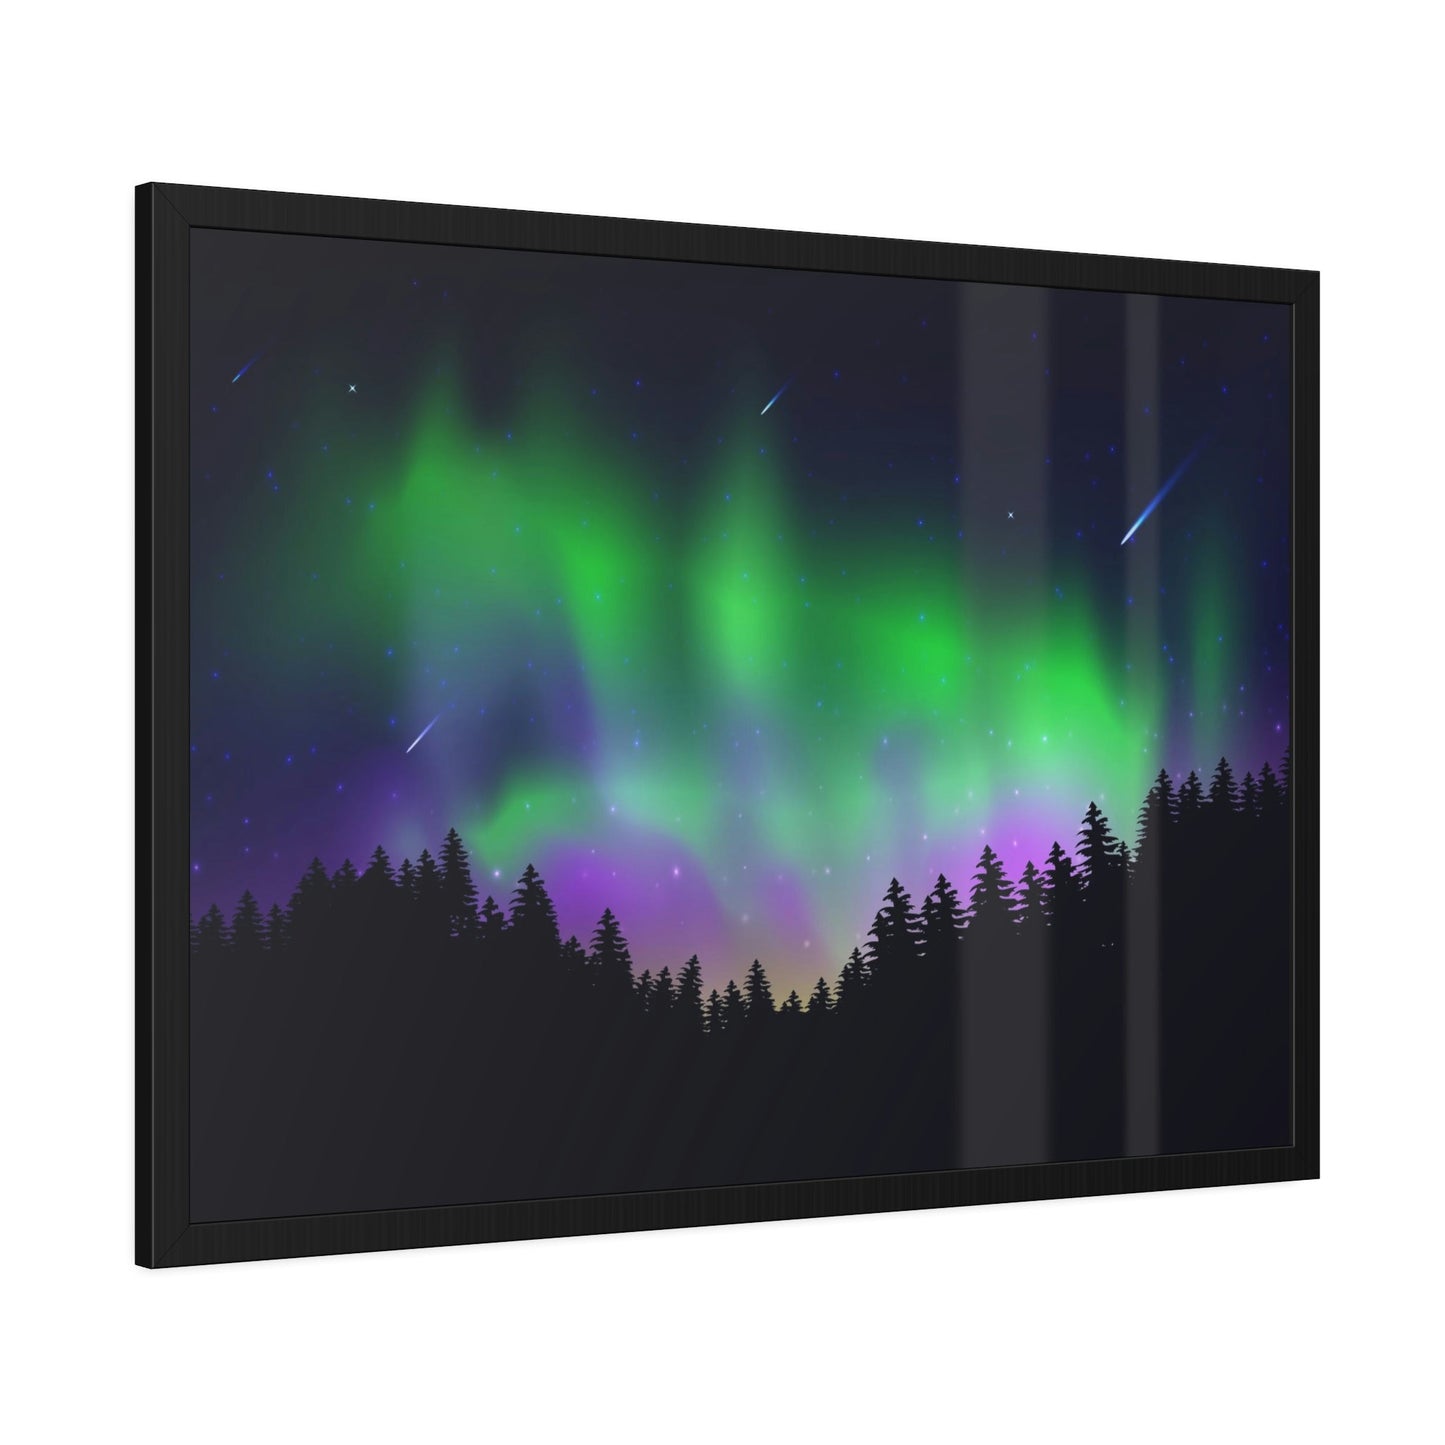 Aurora Borealis Shimmer: A Warm and Fanciful Night Sky